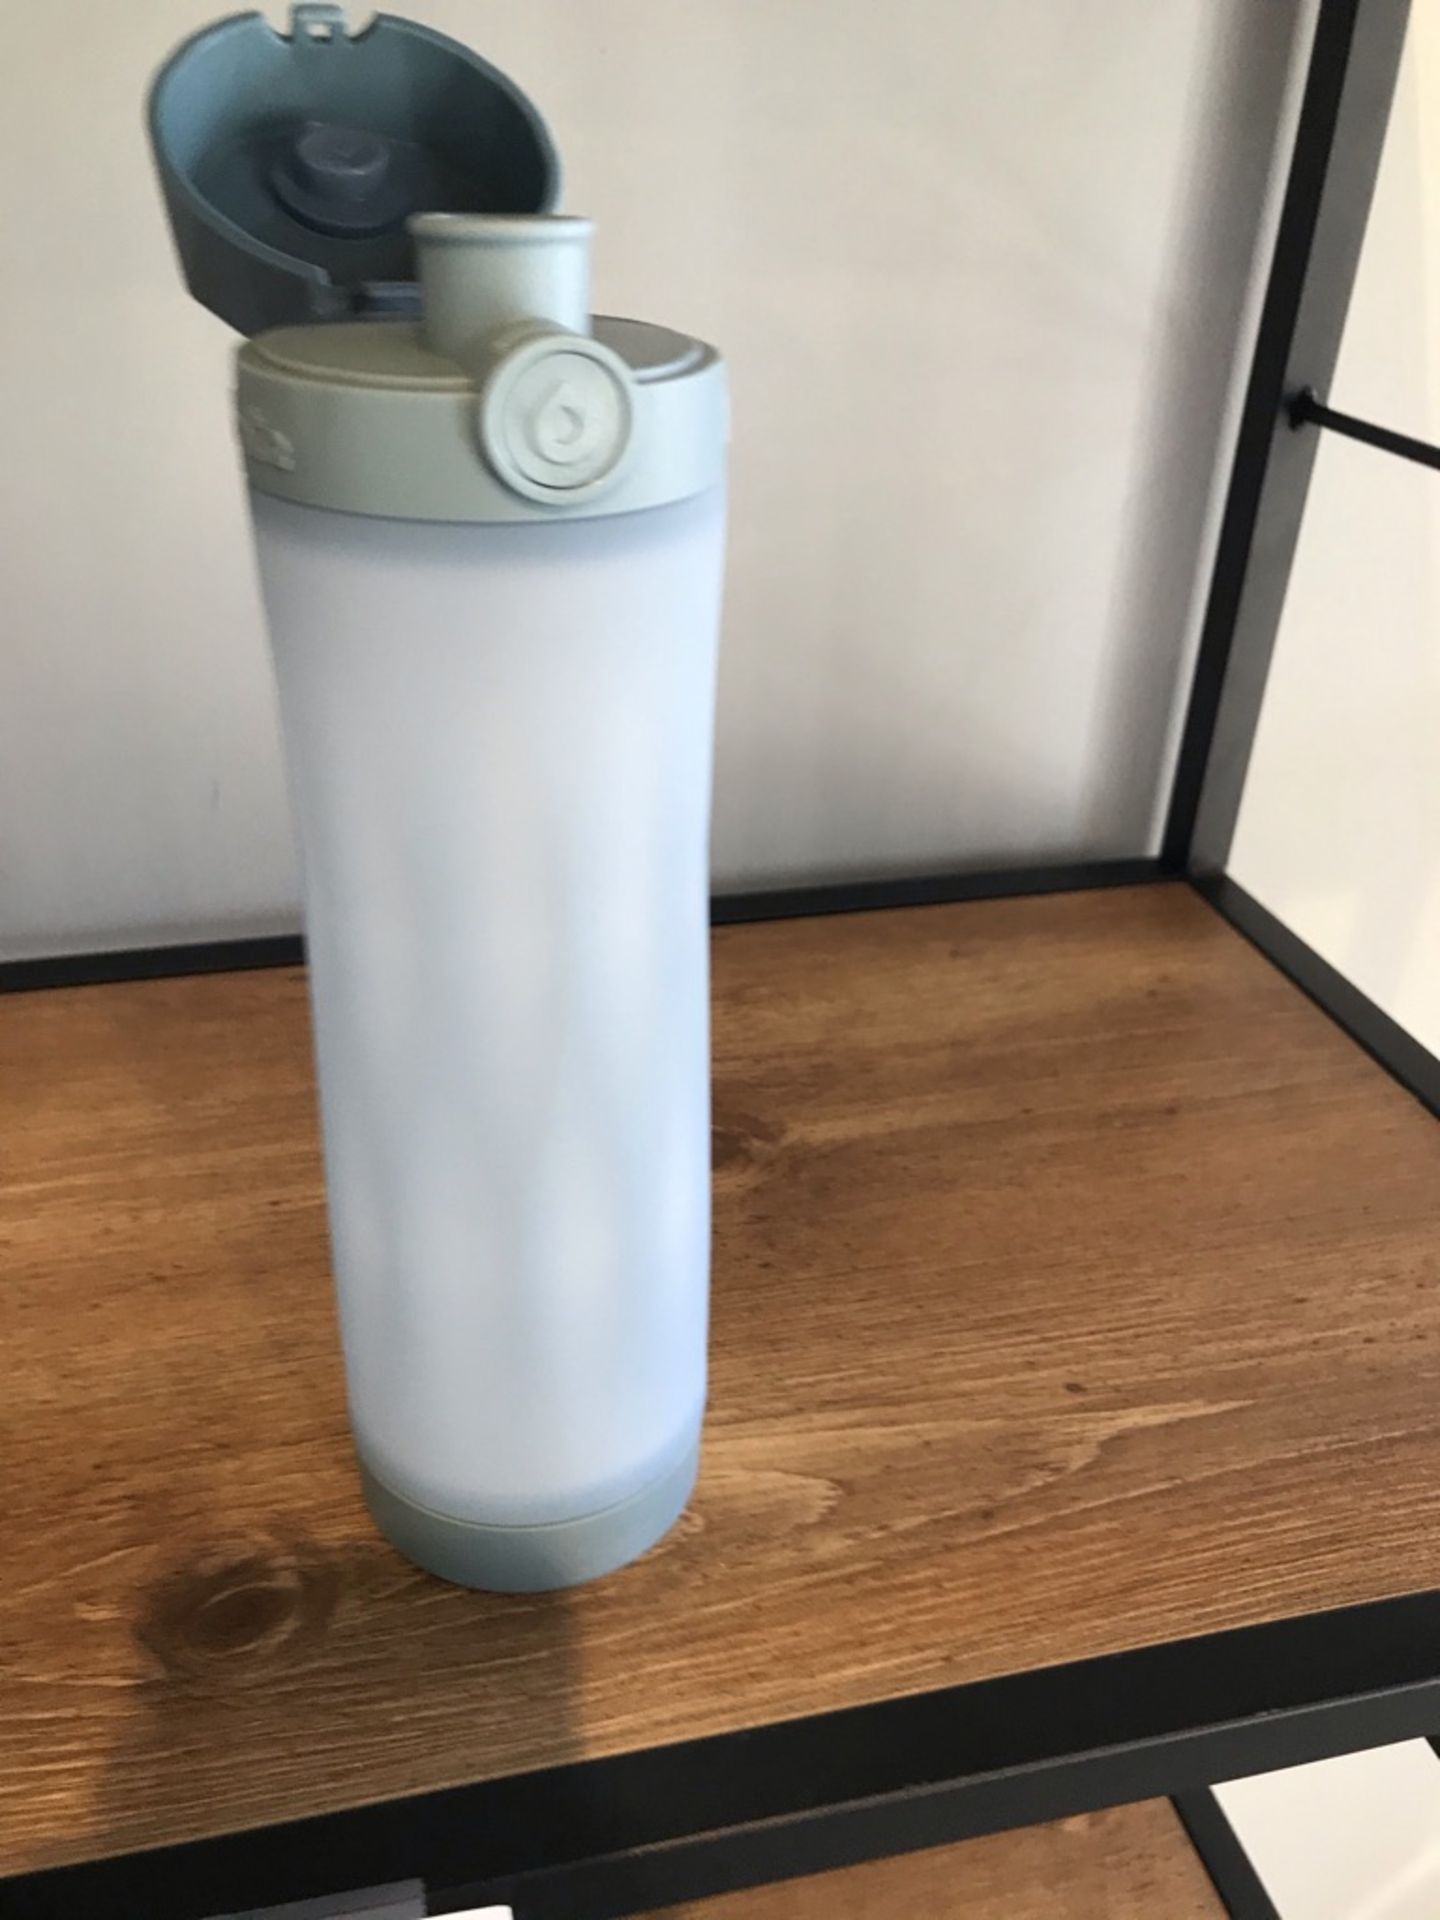 HIDRATE SPARK 3 SMART WATER BOTTLE, BLUETOOTH ENABLED (RETAIL PRICE $59.95)